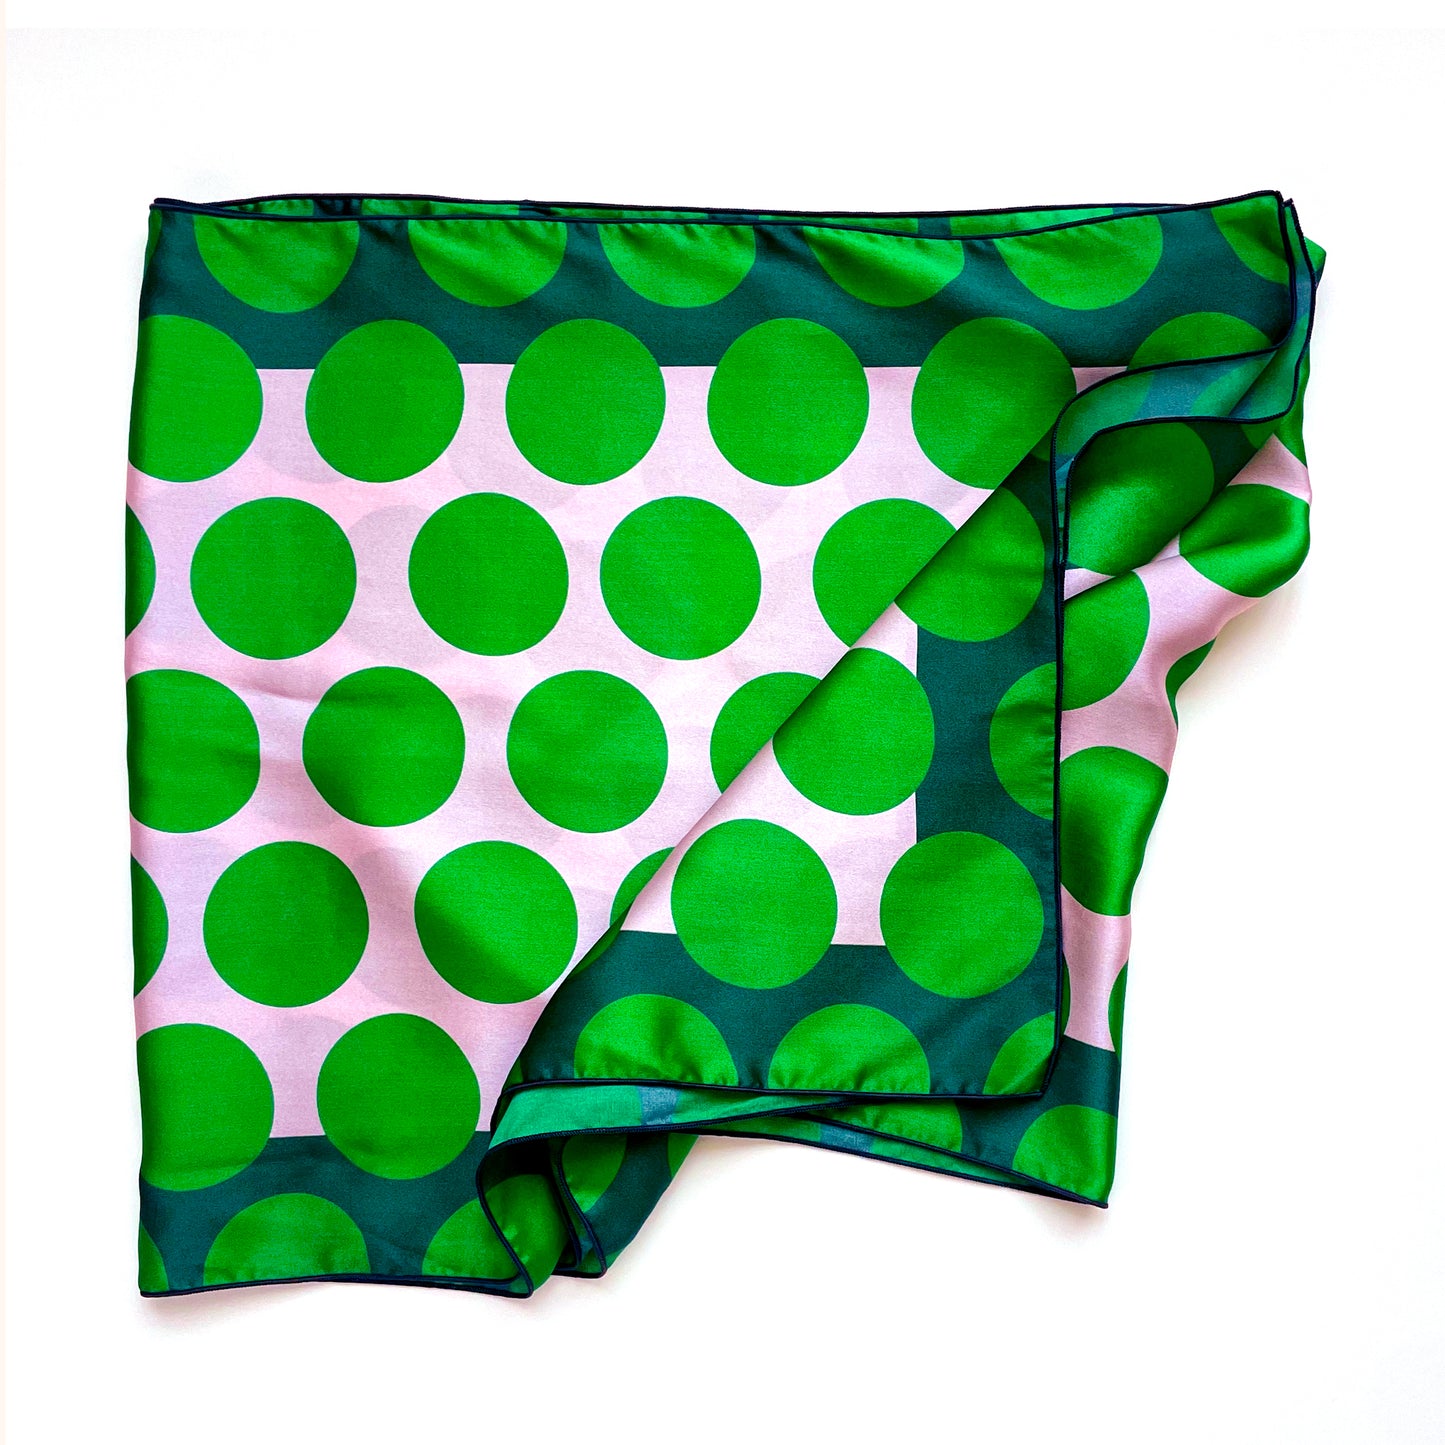 Large green polka dot print on this long silk scarf is a cheerful way to brighten your day and your outfit.